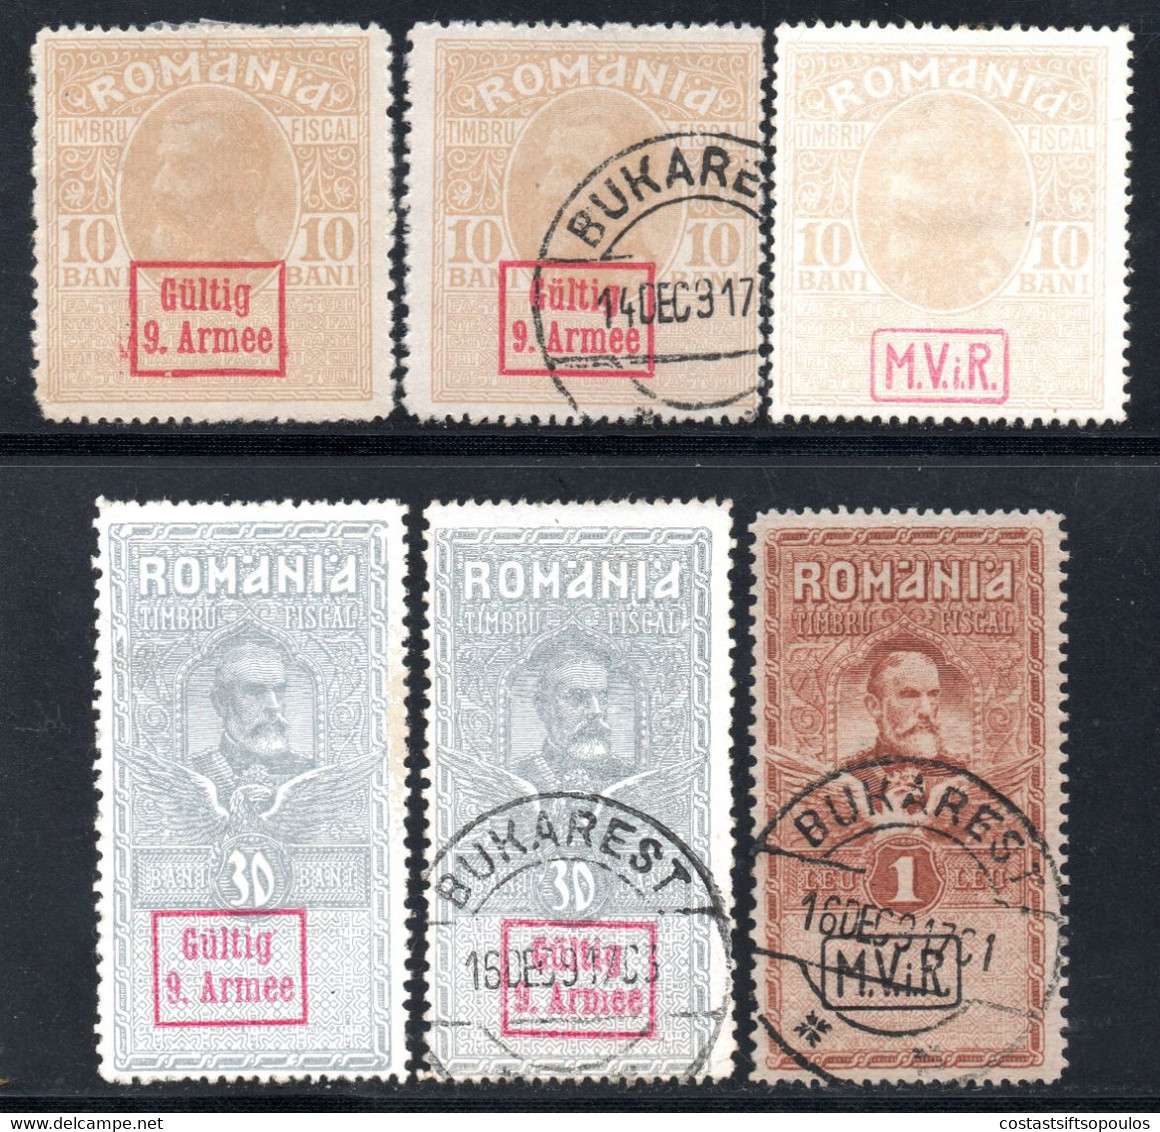 1148.ROMANIA,1916-1918 GERMAN OCCUP.6 ST. LOT,3 MH,3 USED - Foreign Occupations